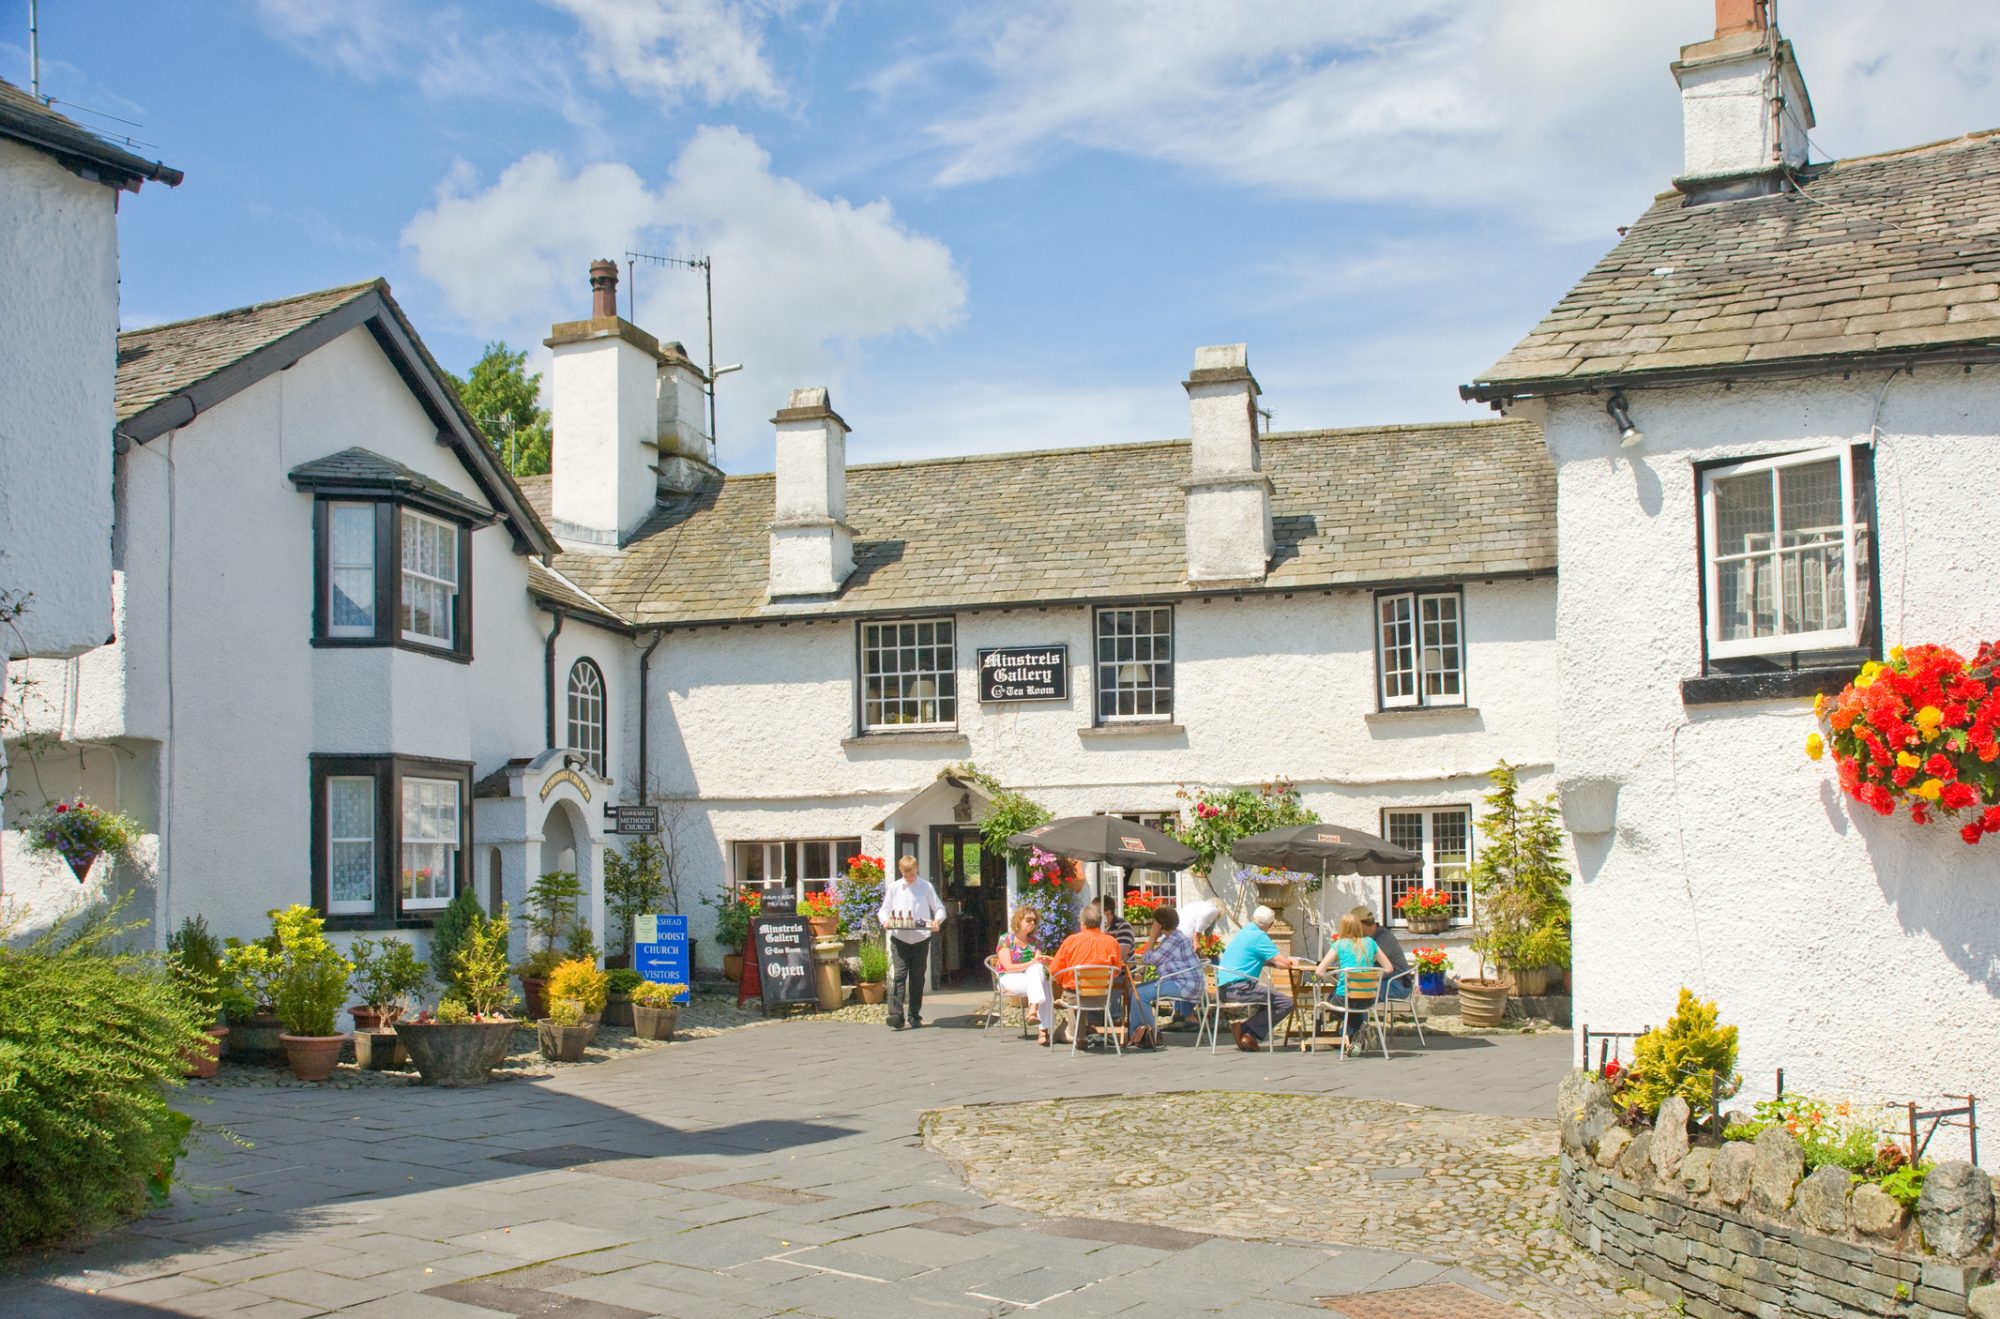 An image of the Minstrels Gallery Tea Room at Hawkshead in the English Lake District with customers dining and drinking outside. The image aims to convey a holiday atmosphere in this attractive tourist destination.